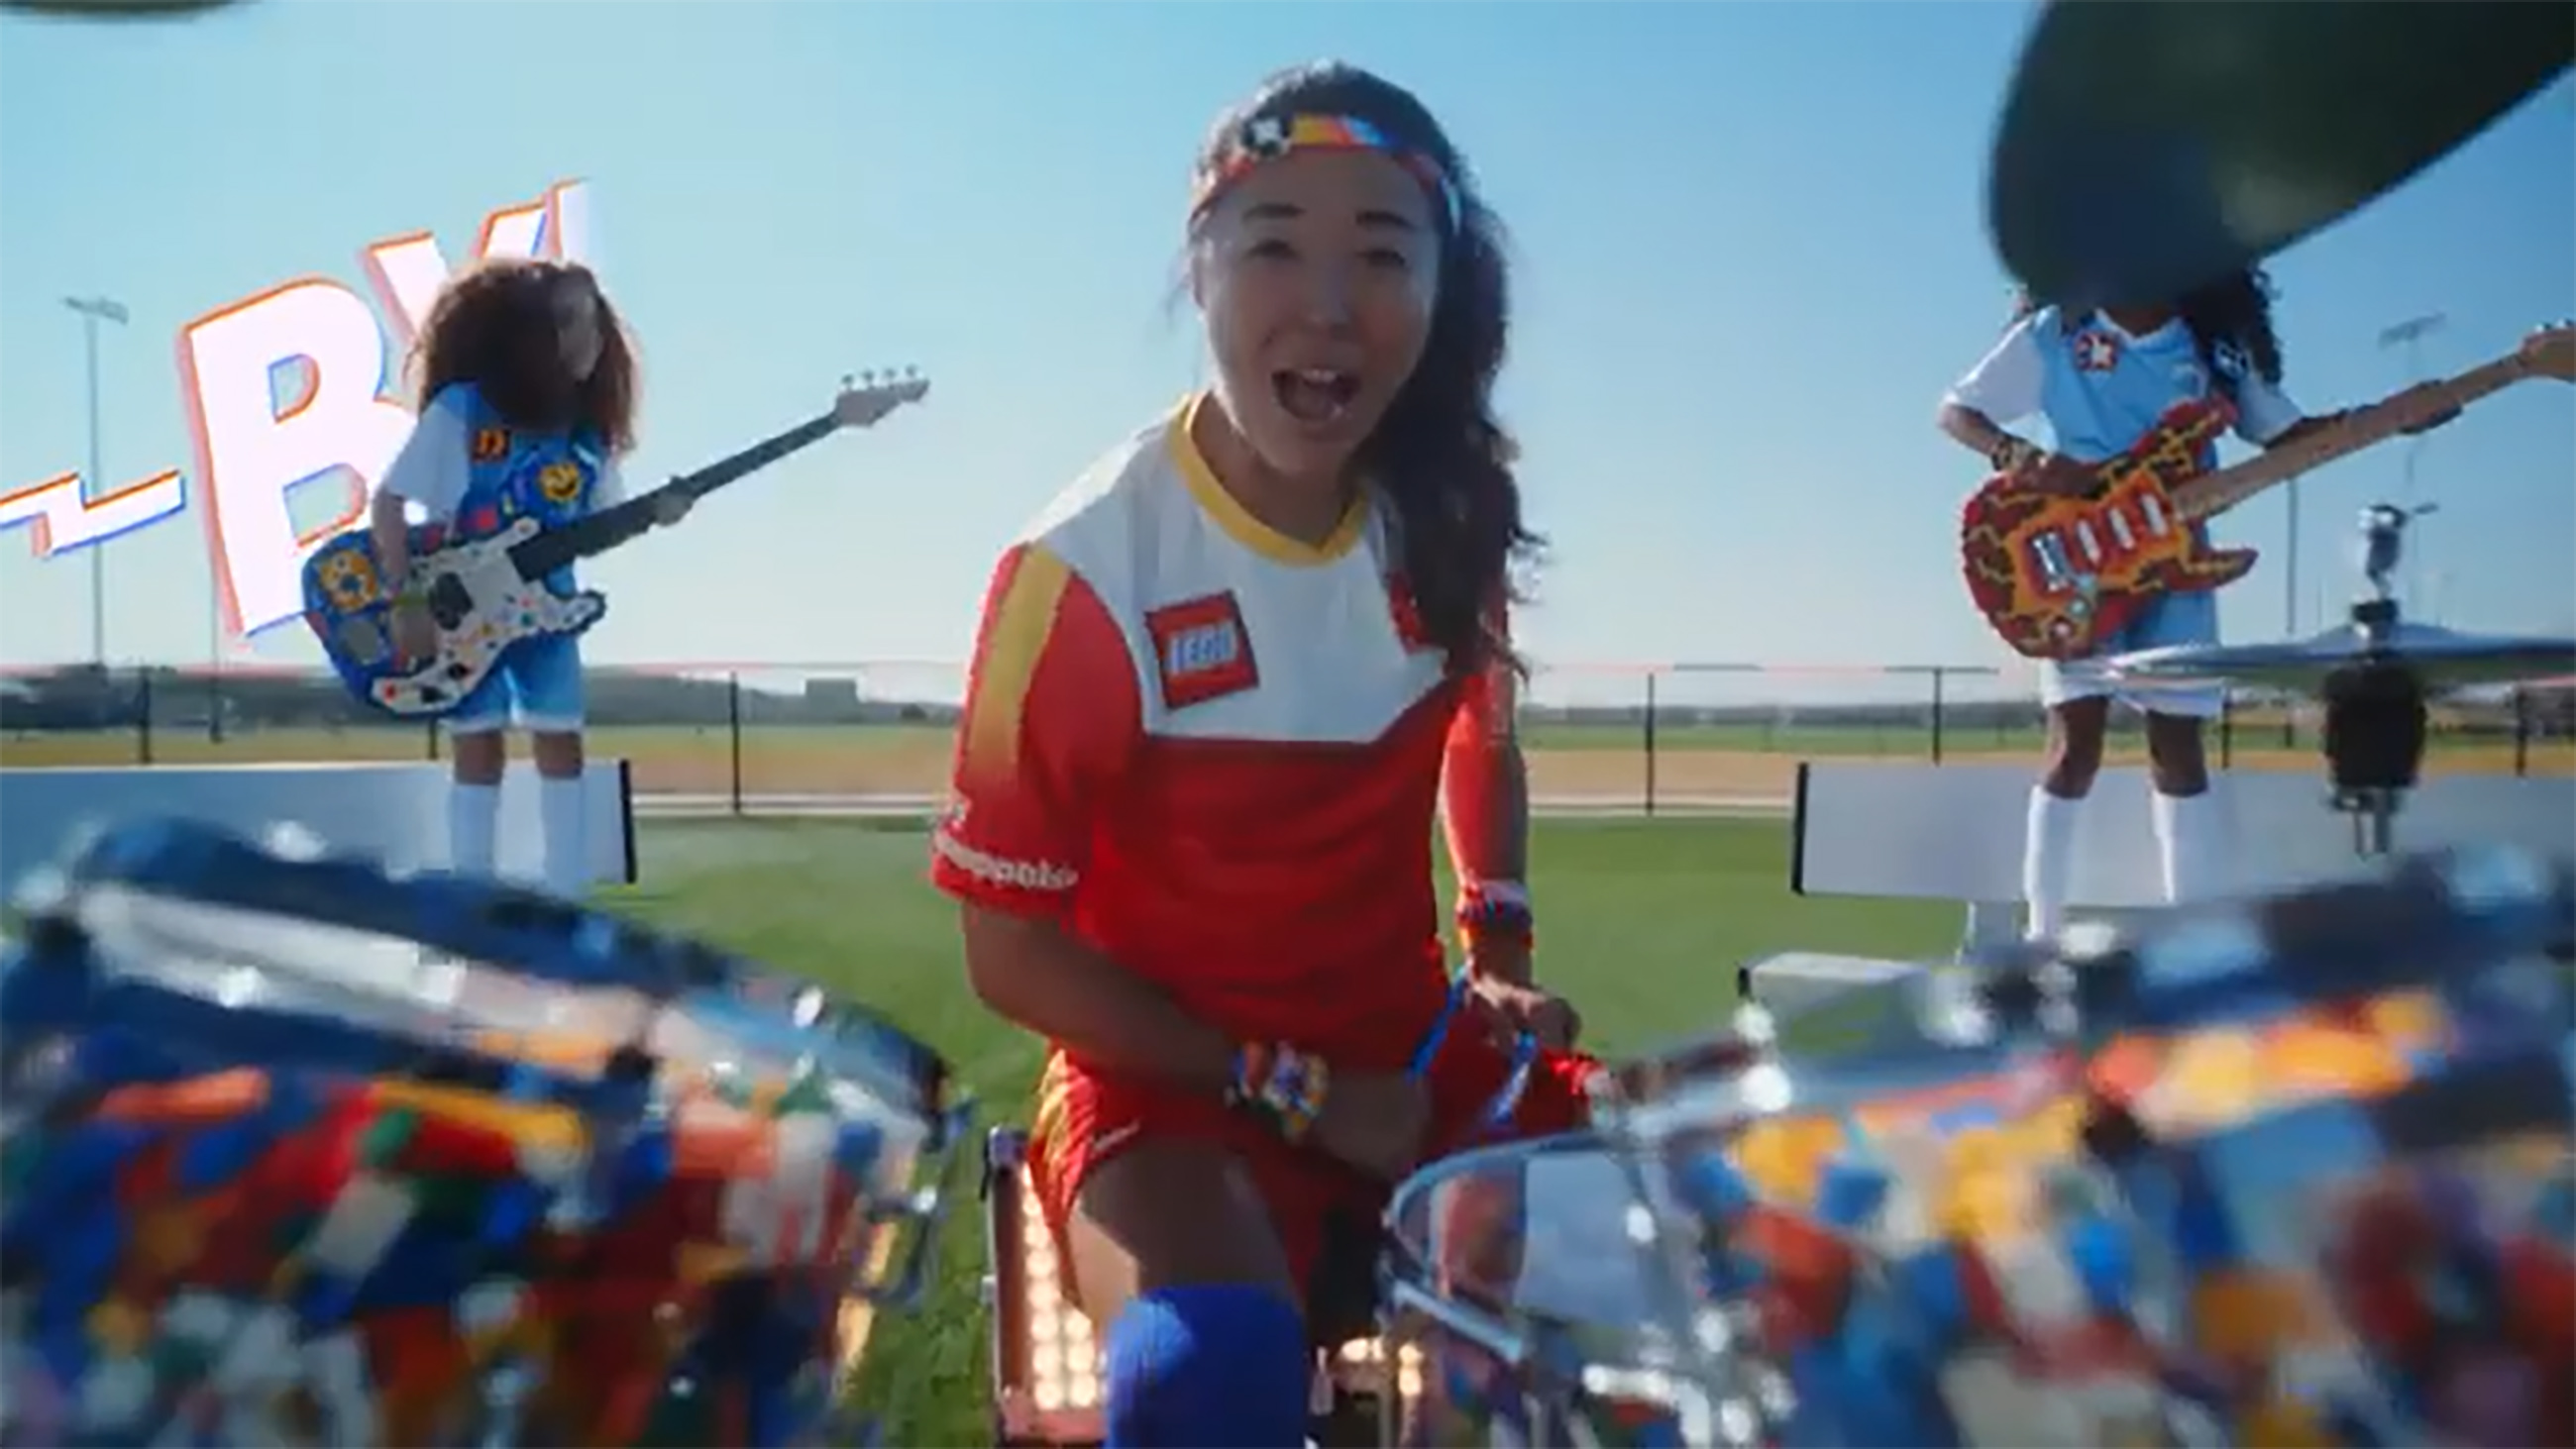 THE LEGO GROUP ENCOURAGES GIRLS TO PLAY UNSTOPPABLE